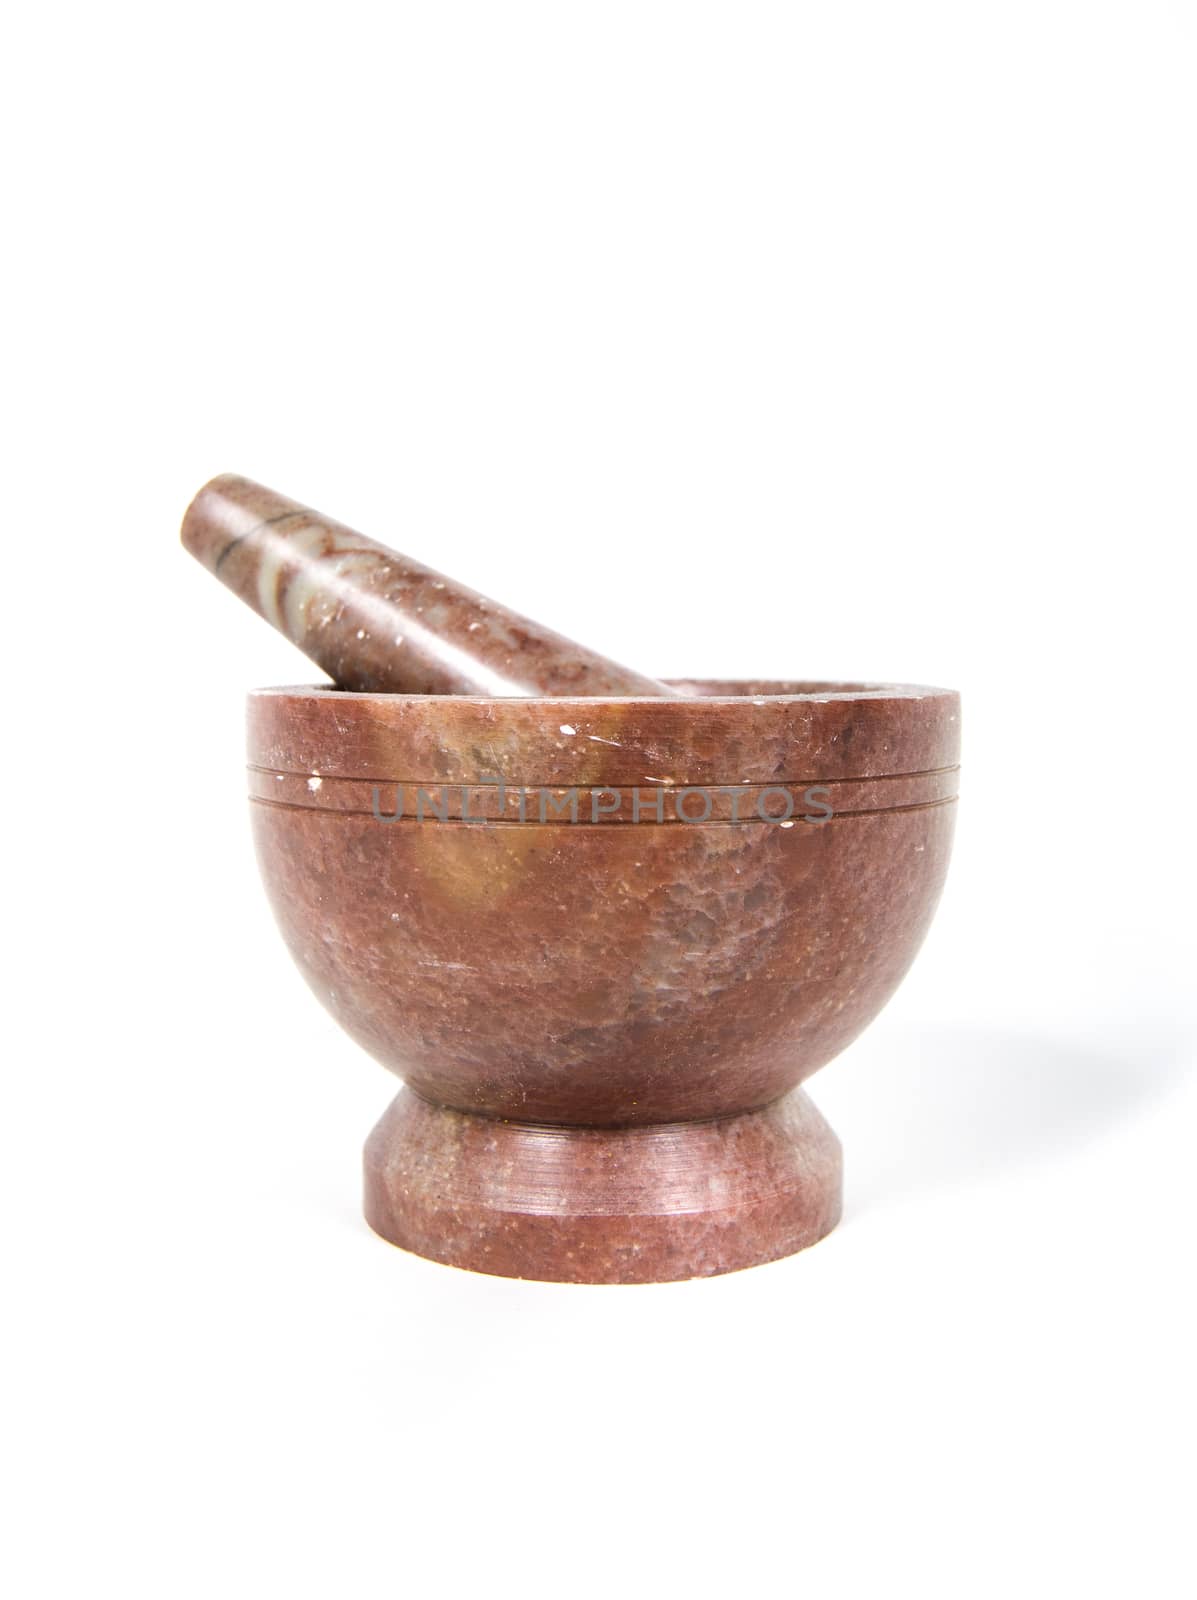 Mortar and Pestle against white backdrop by Njean